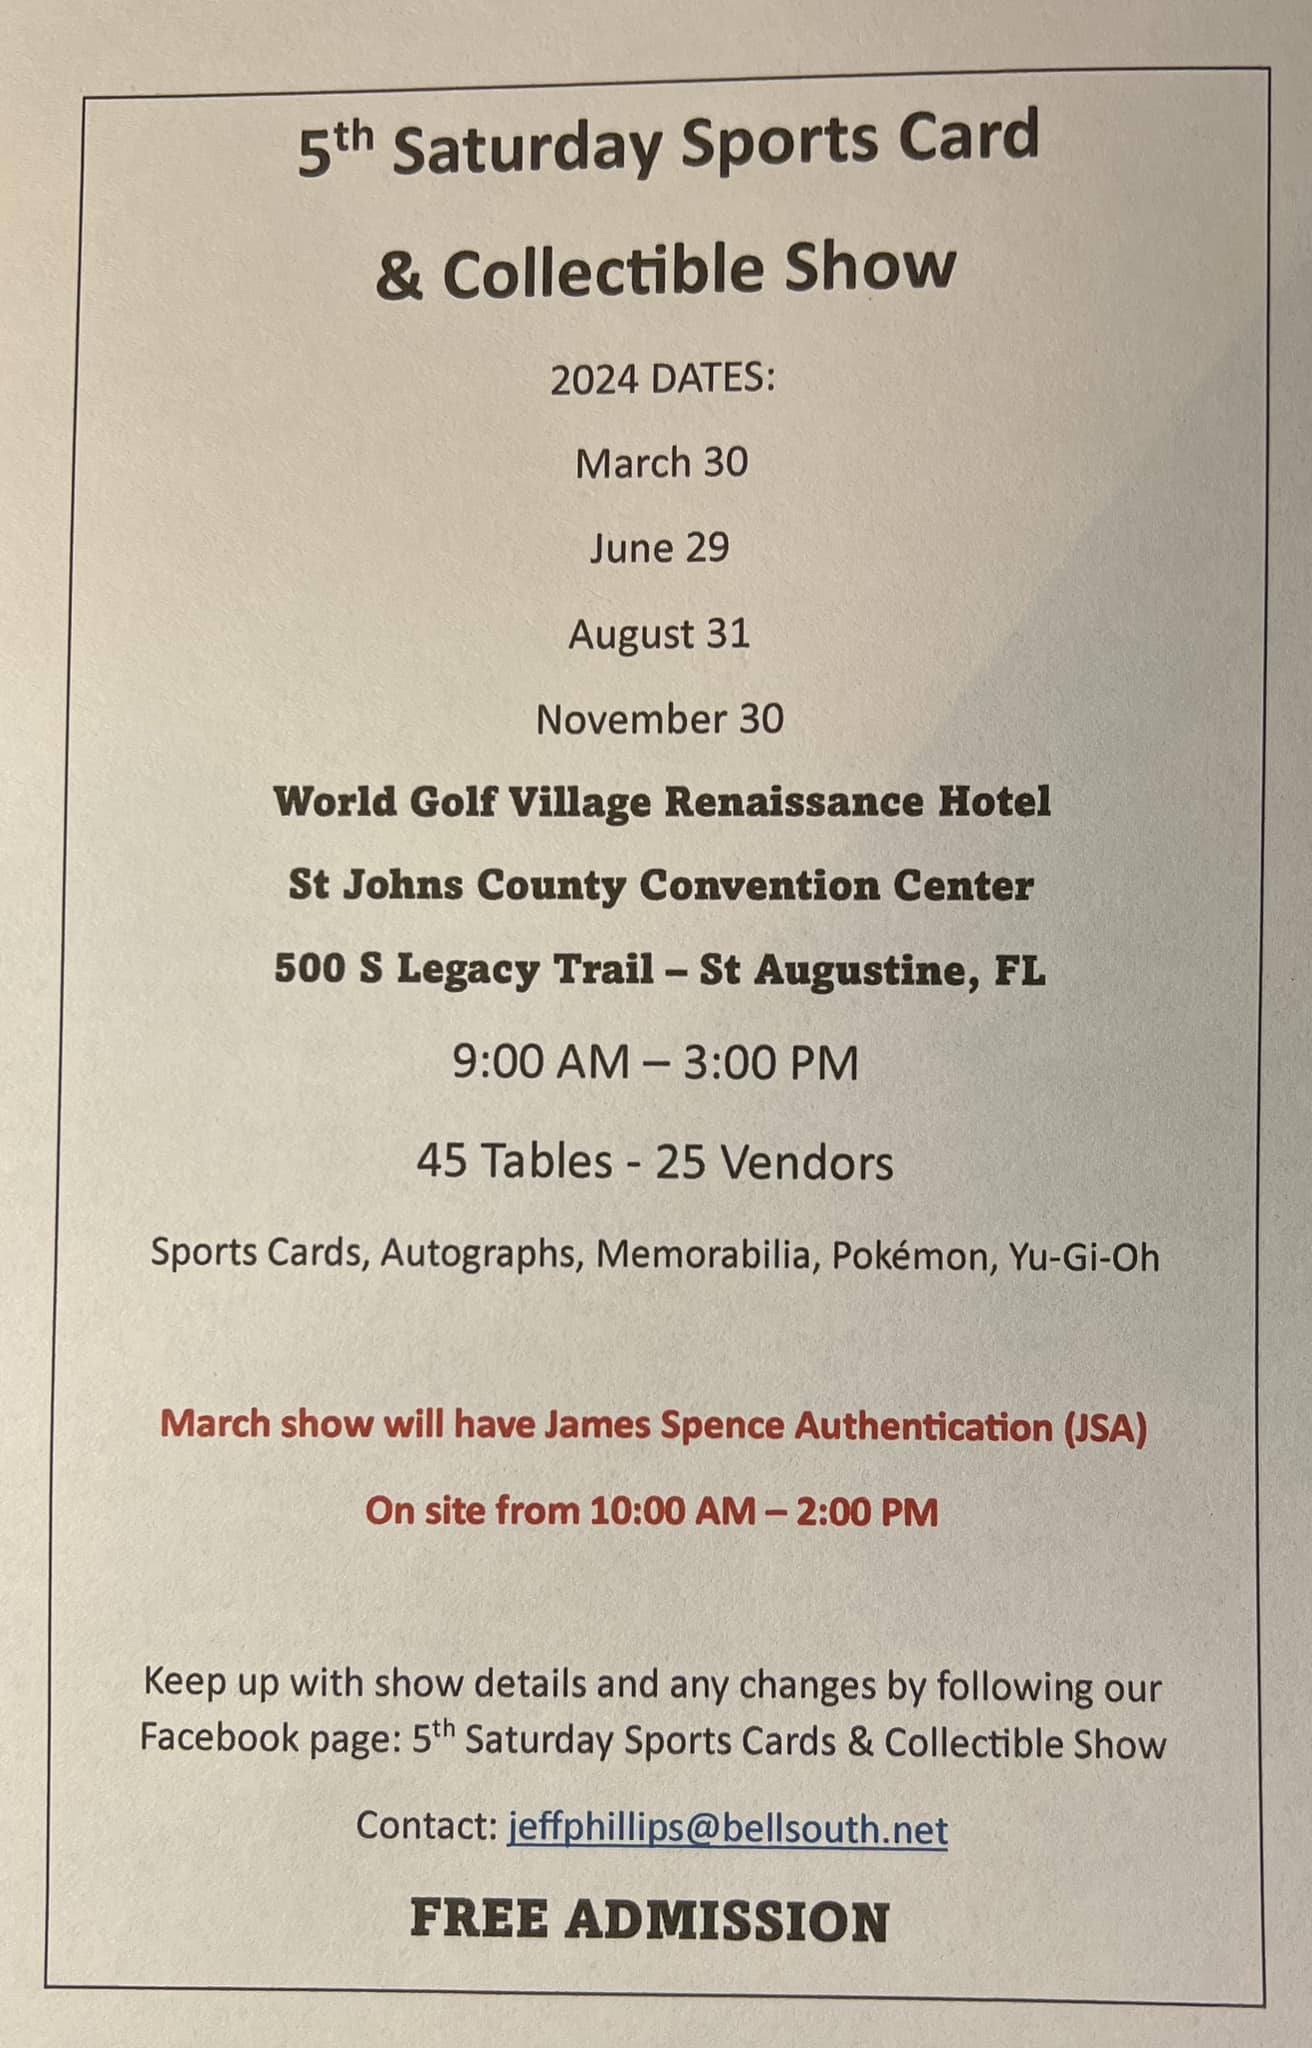 5th Saturday Sports Card & Collectibles Show - St. Augustine